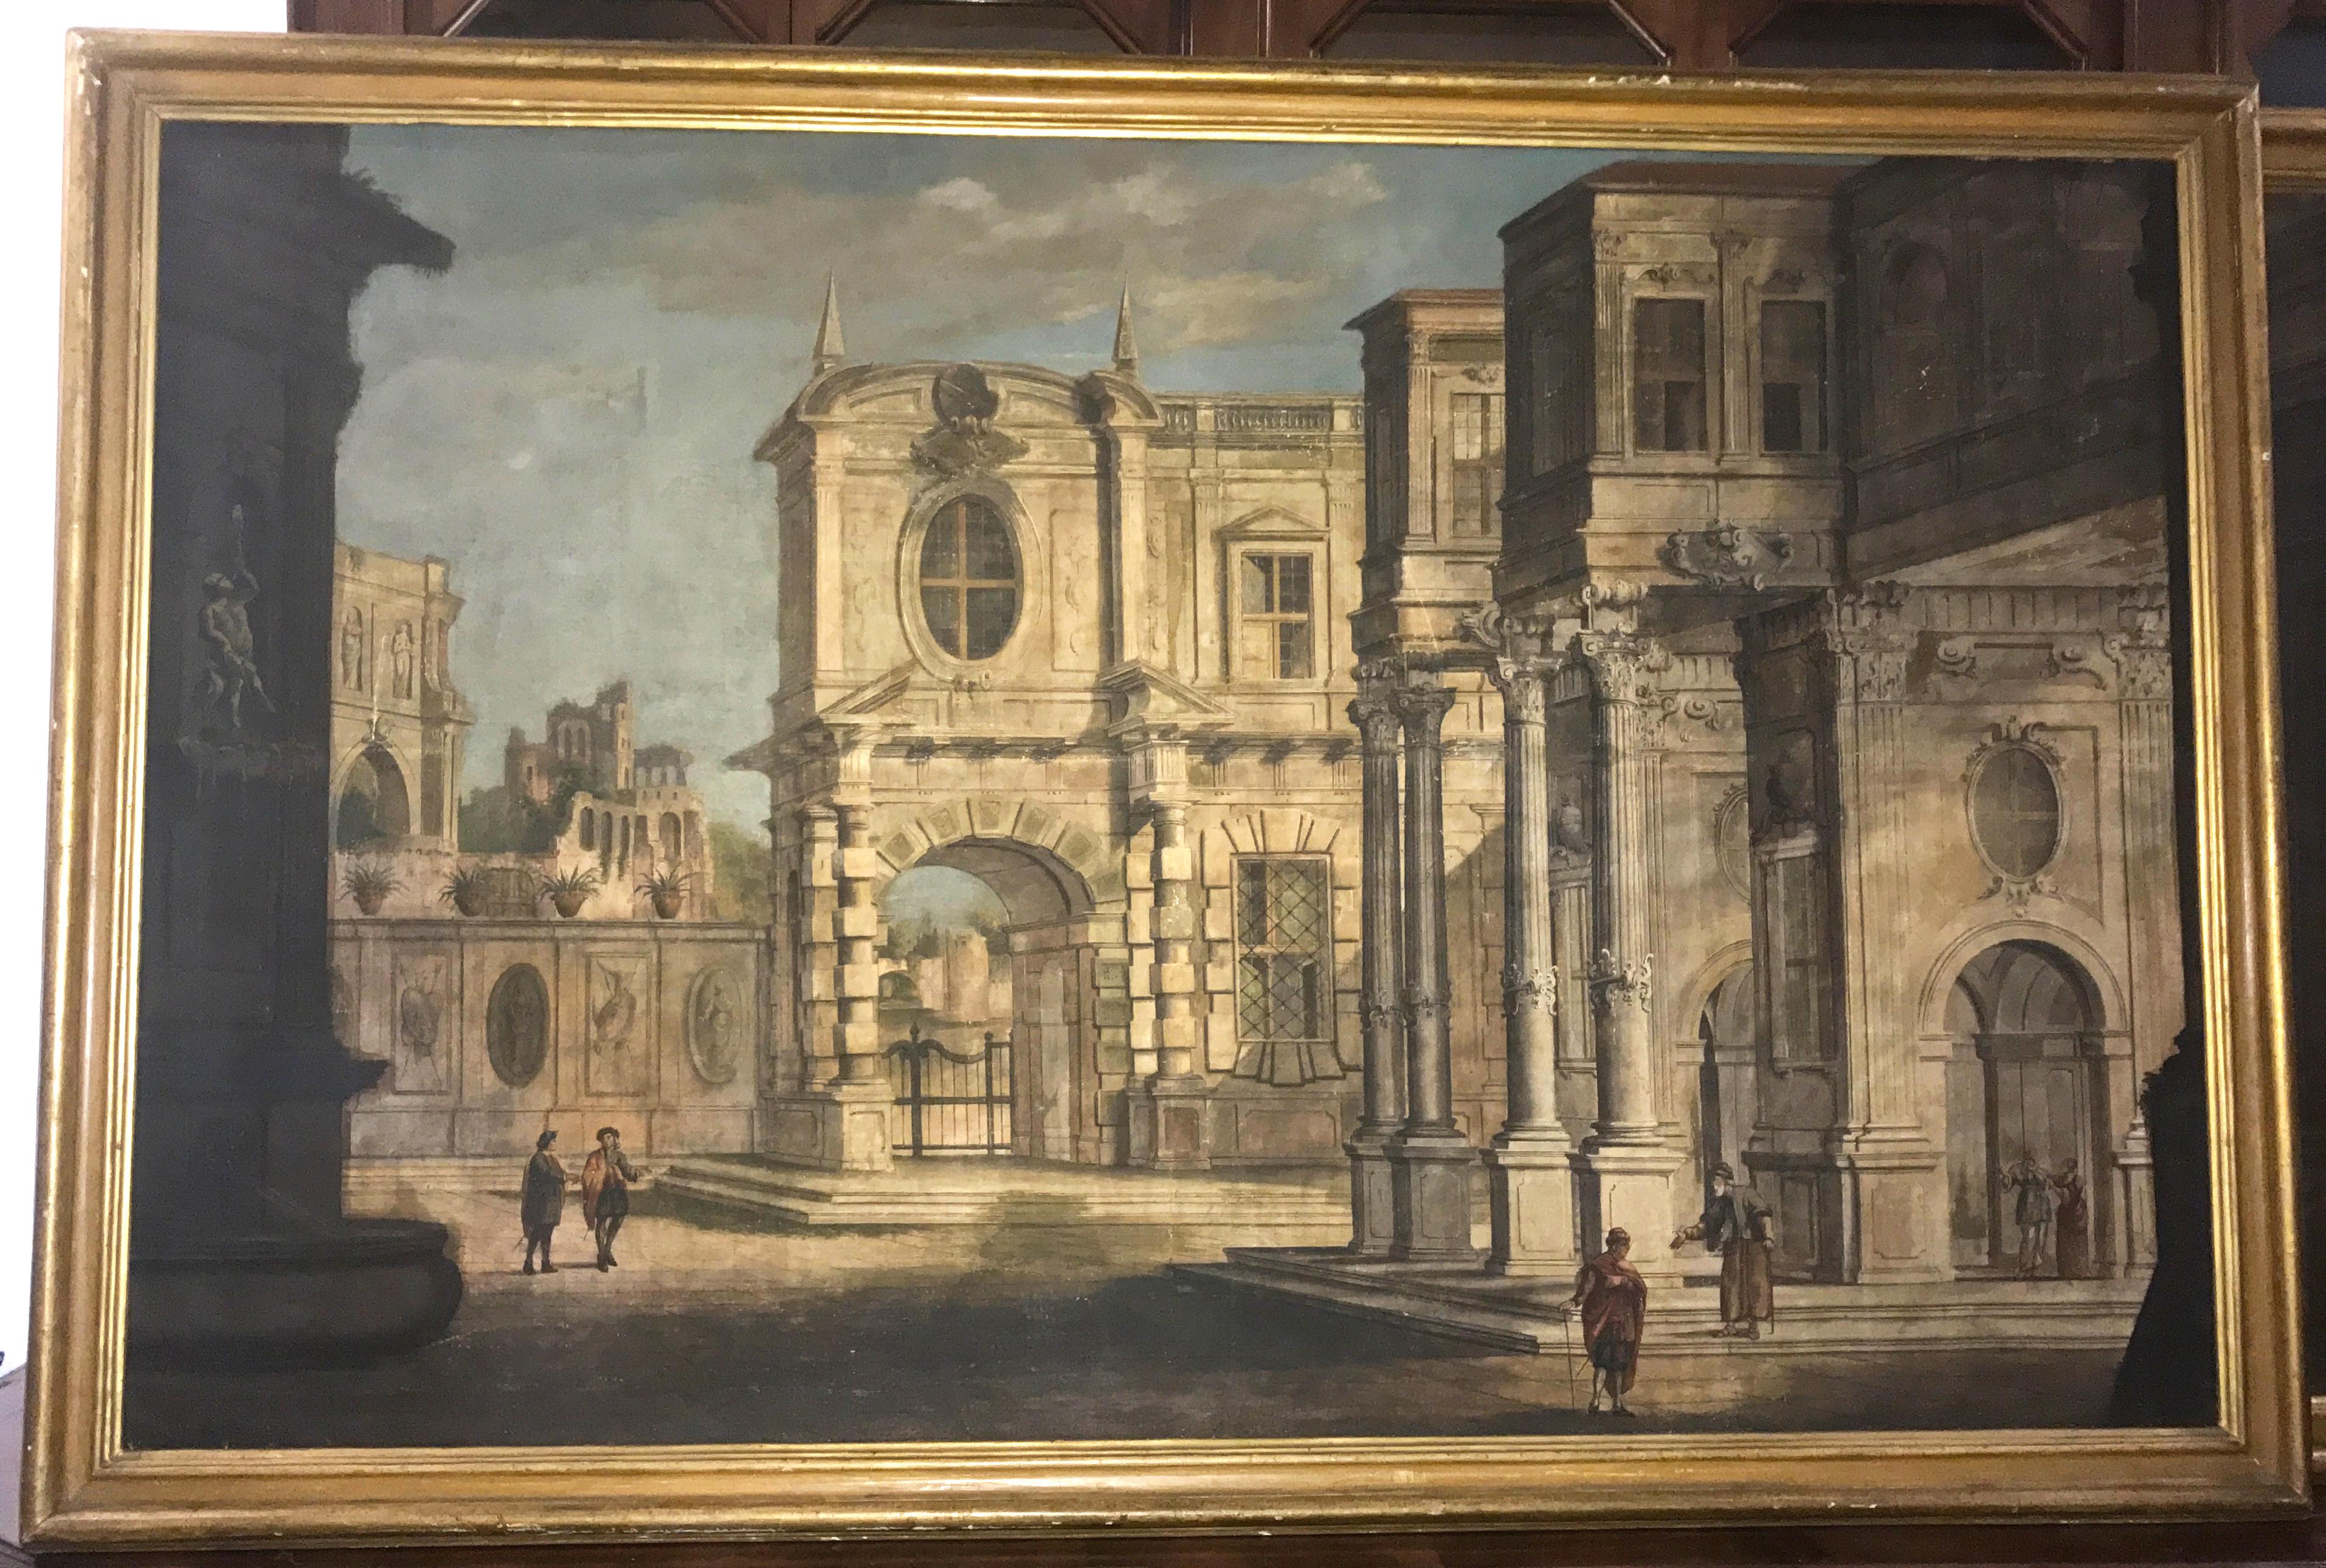 Pair of Italian 18th Century Tempera on Canvas Classical Paintings 